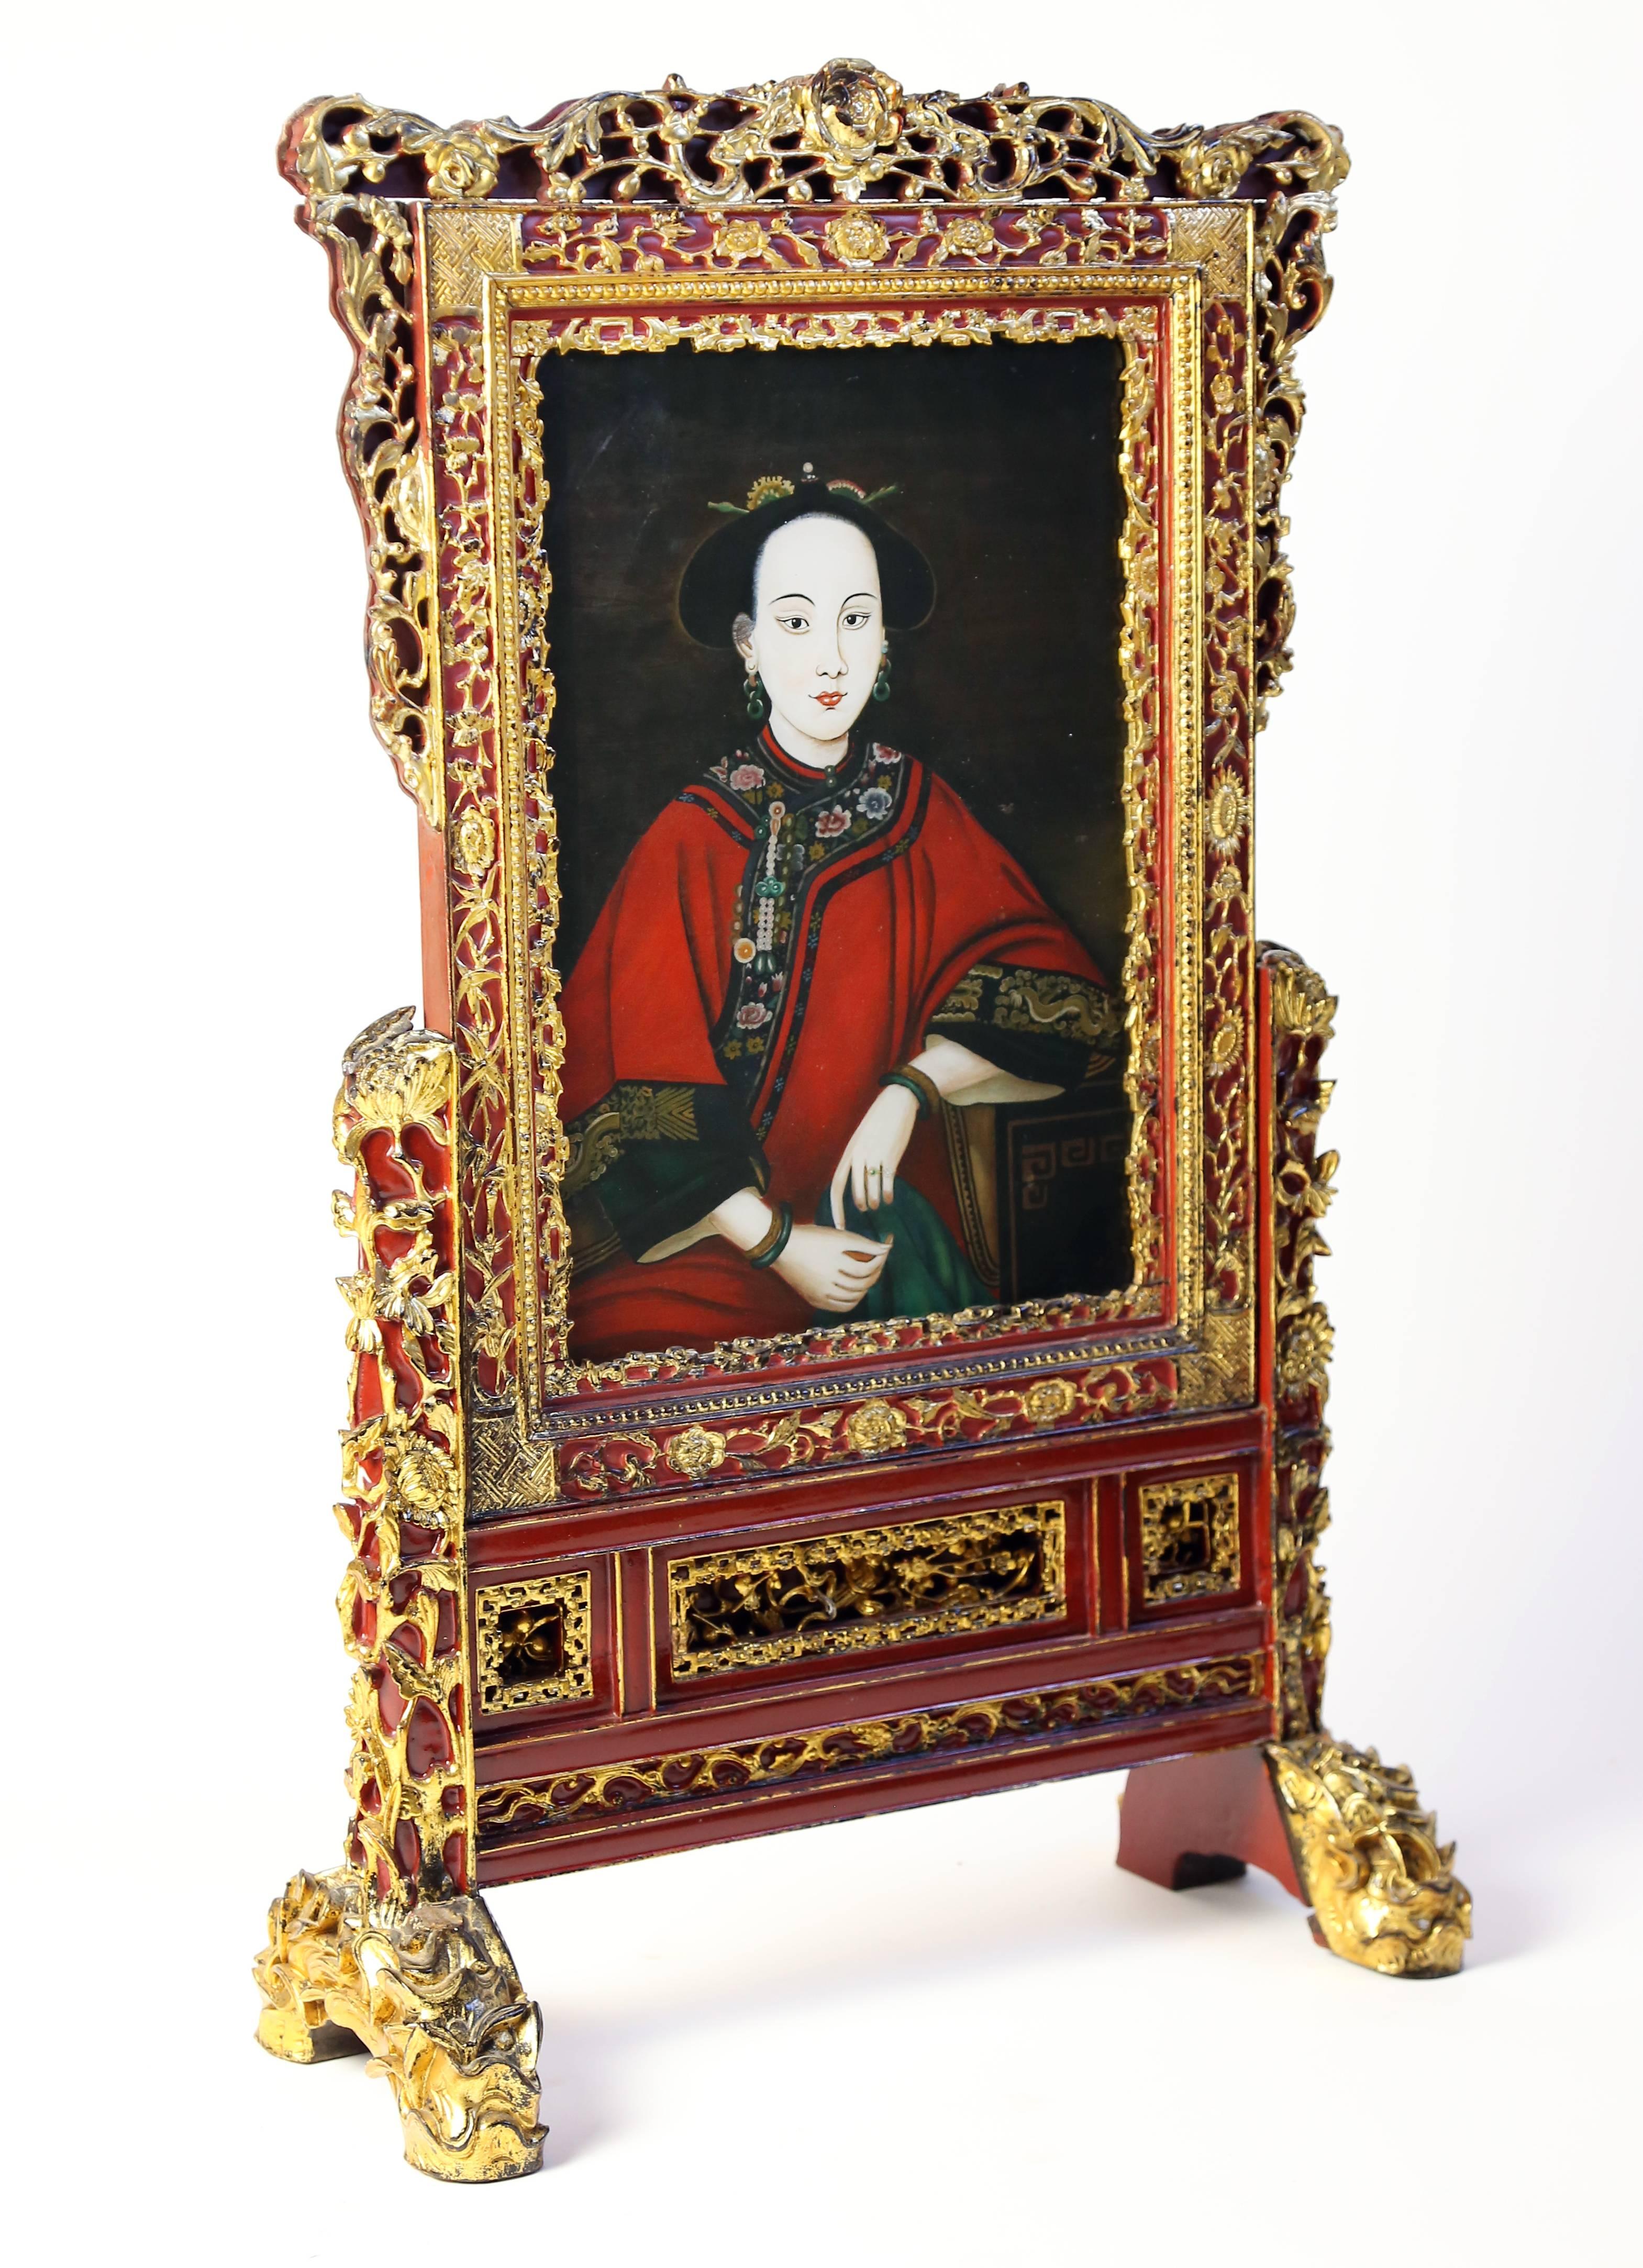 An ornate and unusual table screen featuring a fantastic reverse glass painted portrait of a beautiful young woman. Portrait is set into a highly carved and decorative gilded frame and stand.
 